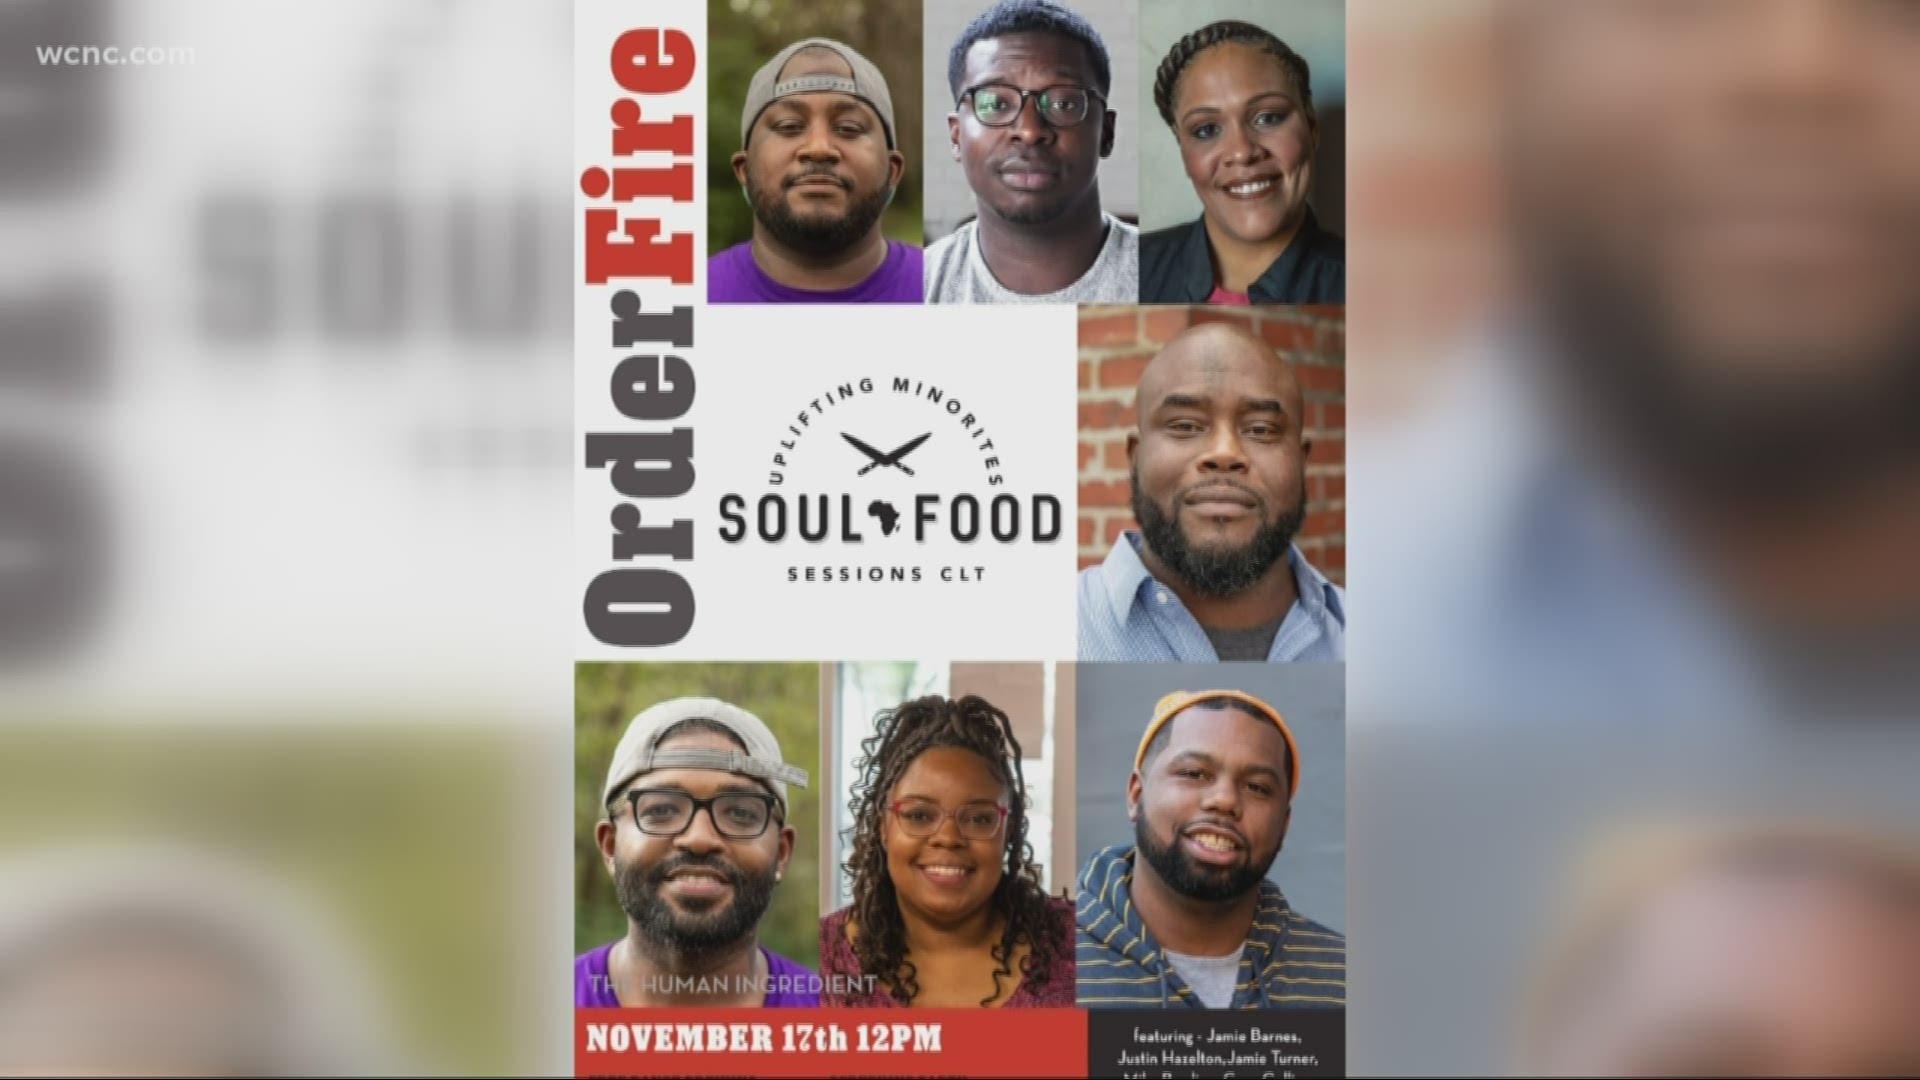 Order/Fire: Soul Food Sessions screening starts tomorrow at noon at Free Range Brewing.